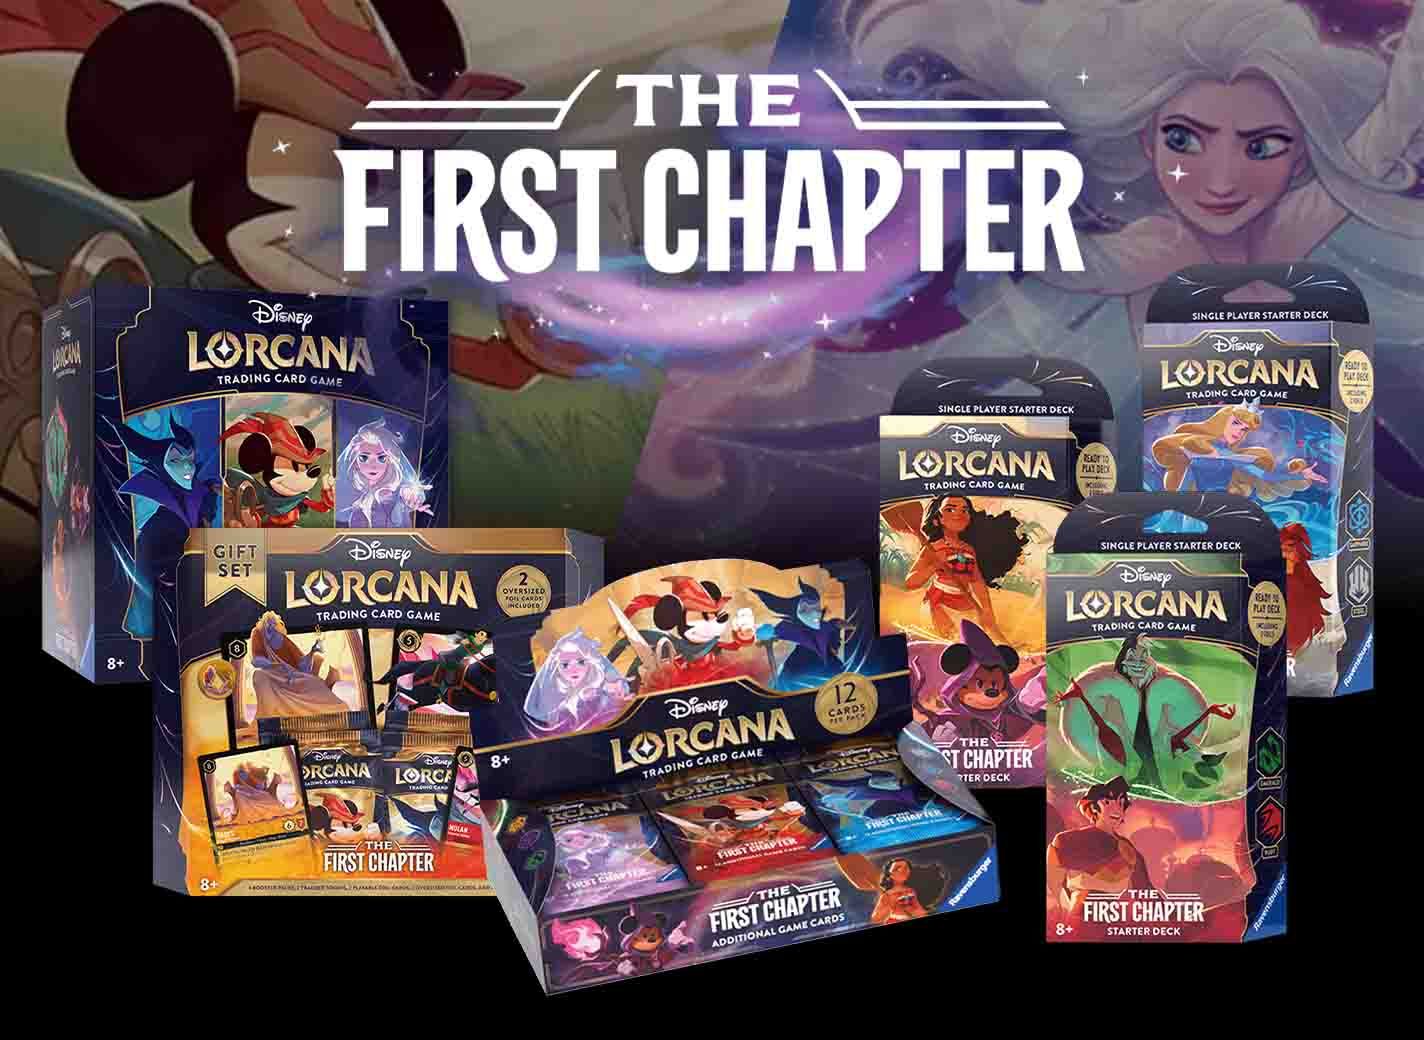 Buyer's Guide to Disney Lorcana, The First Chapter